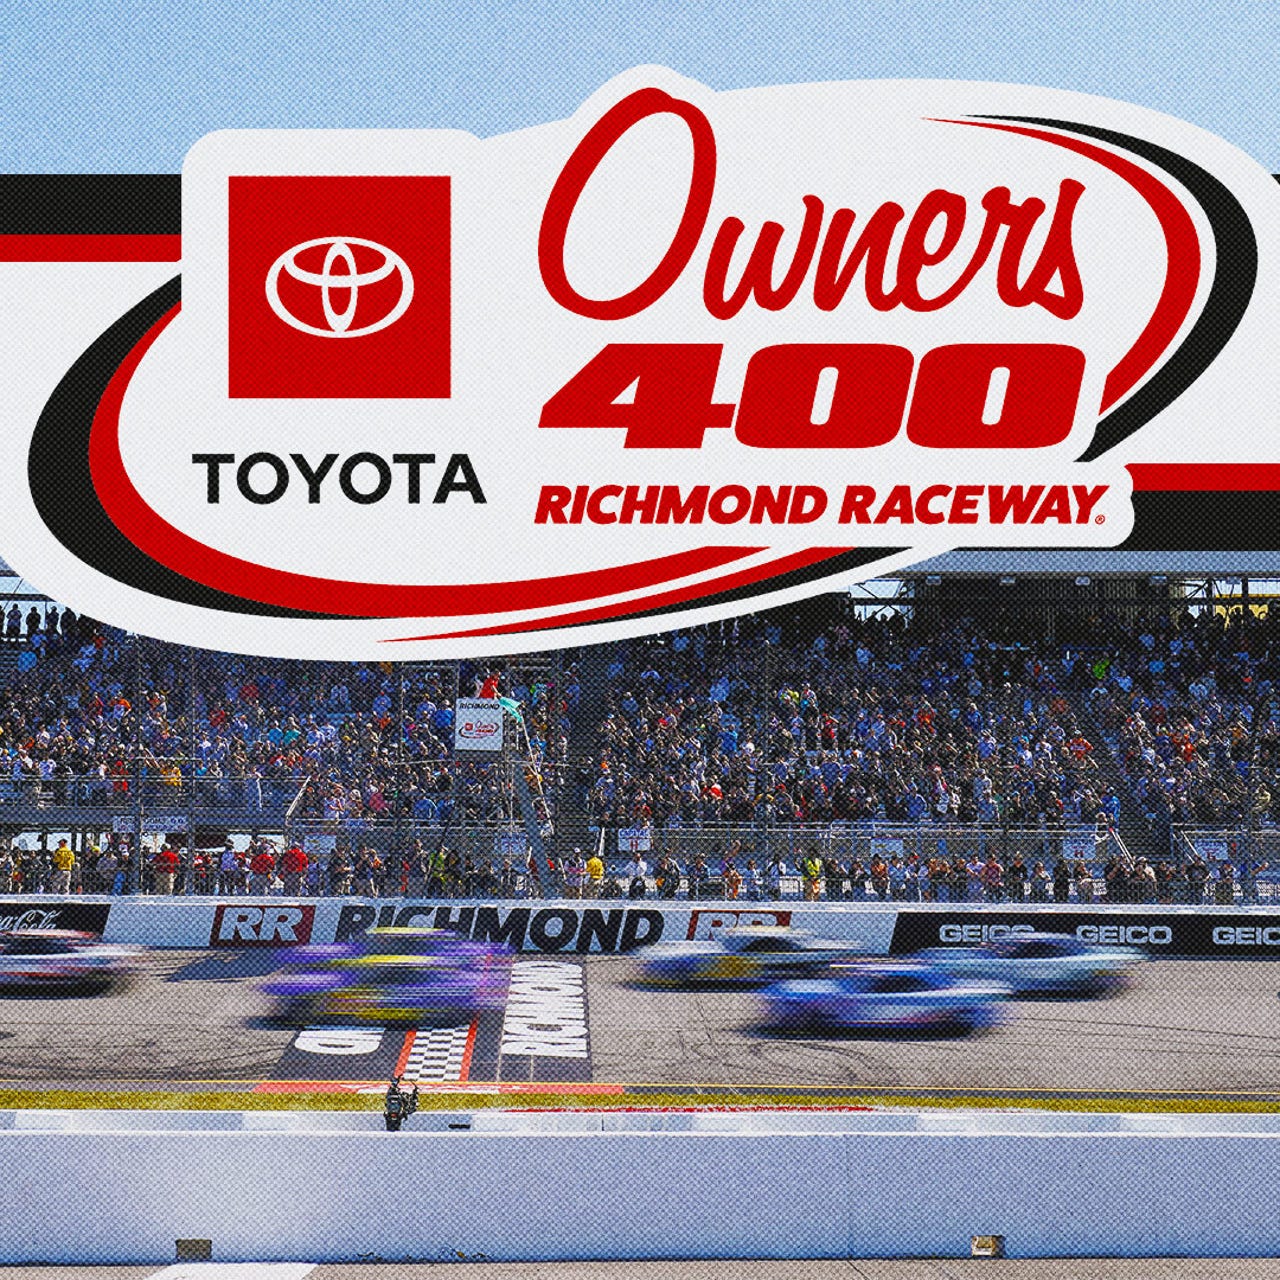 Toyota Owners 400 highlights Kyle Larson victorious at Richmond Raceway FOX Sports